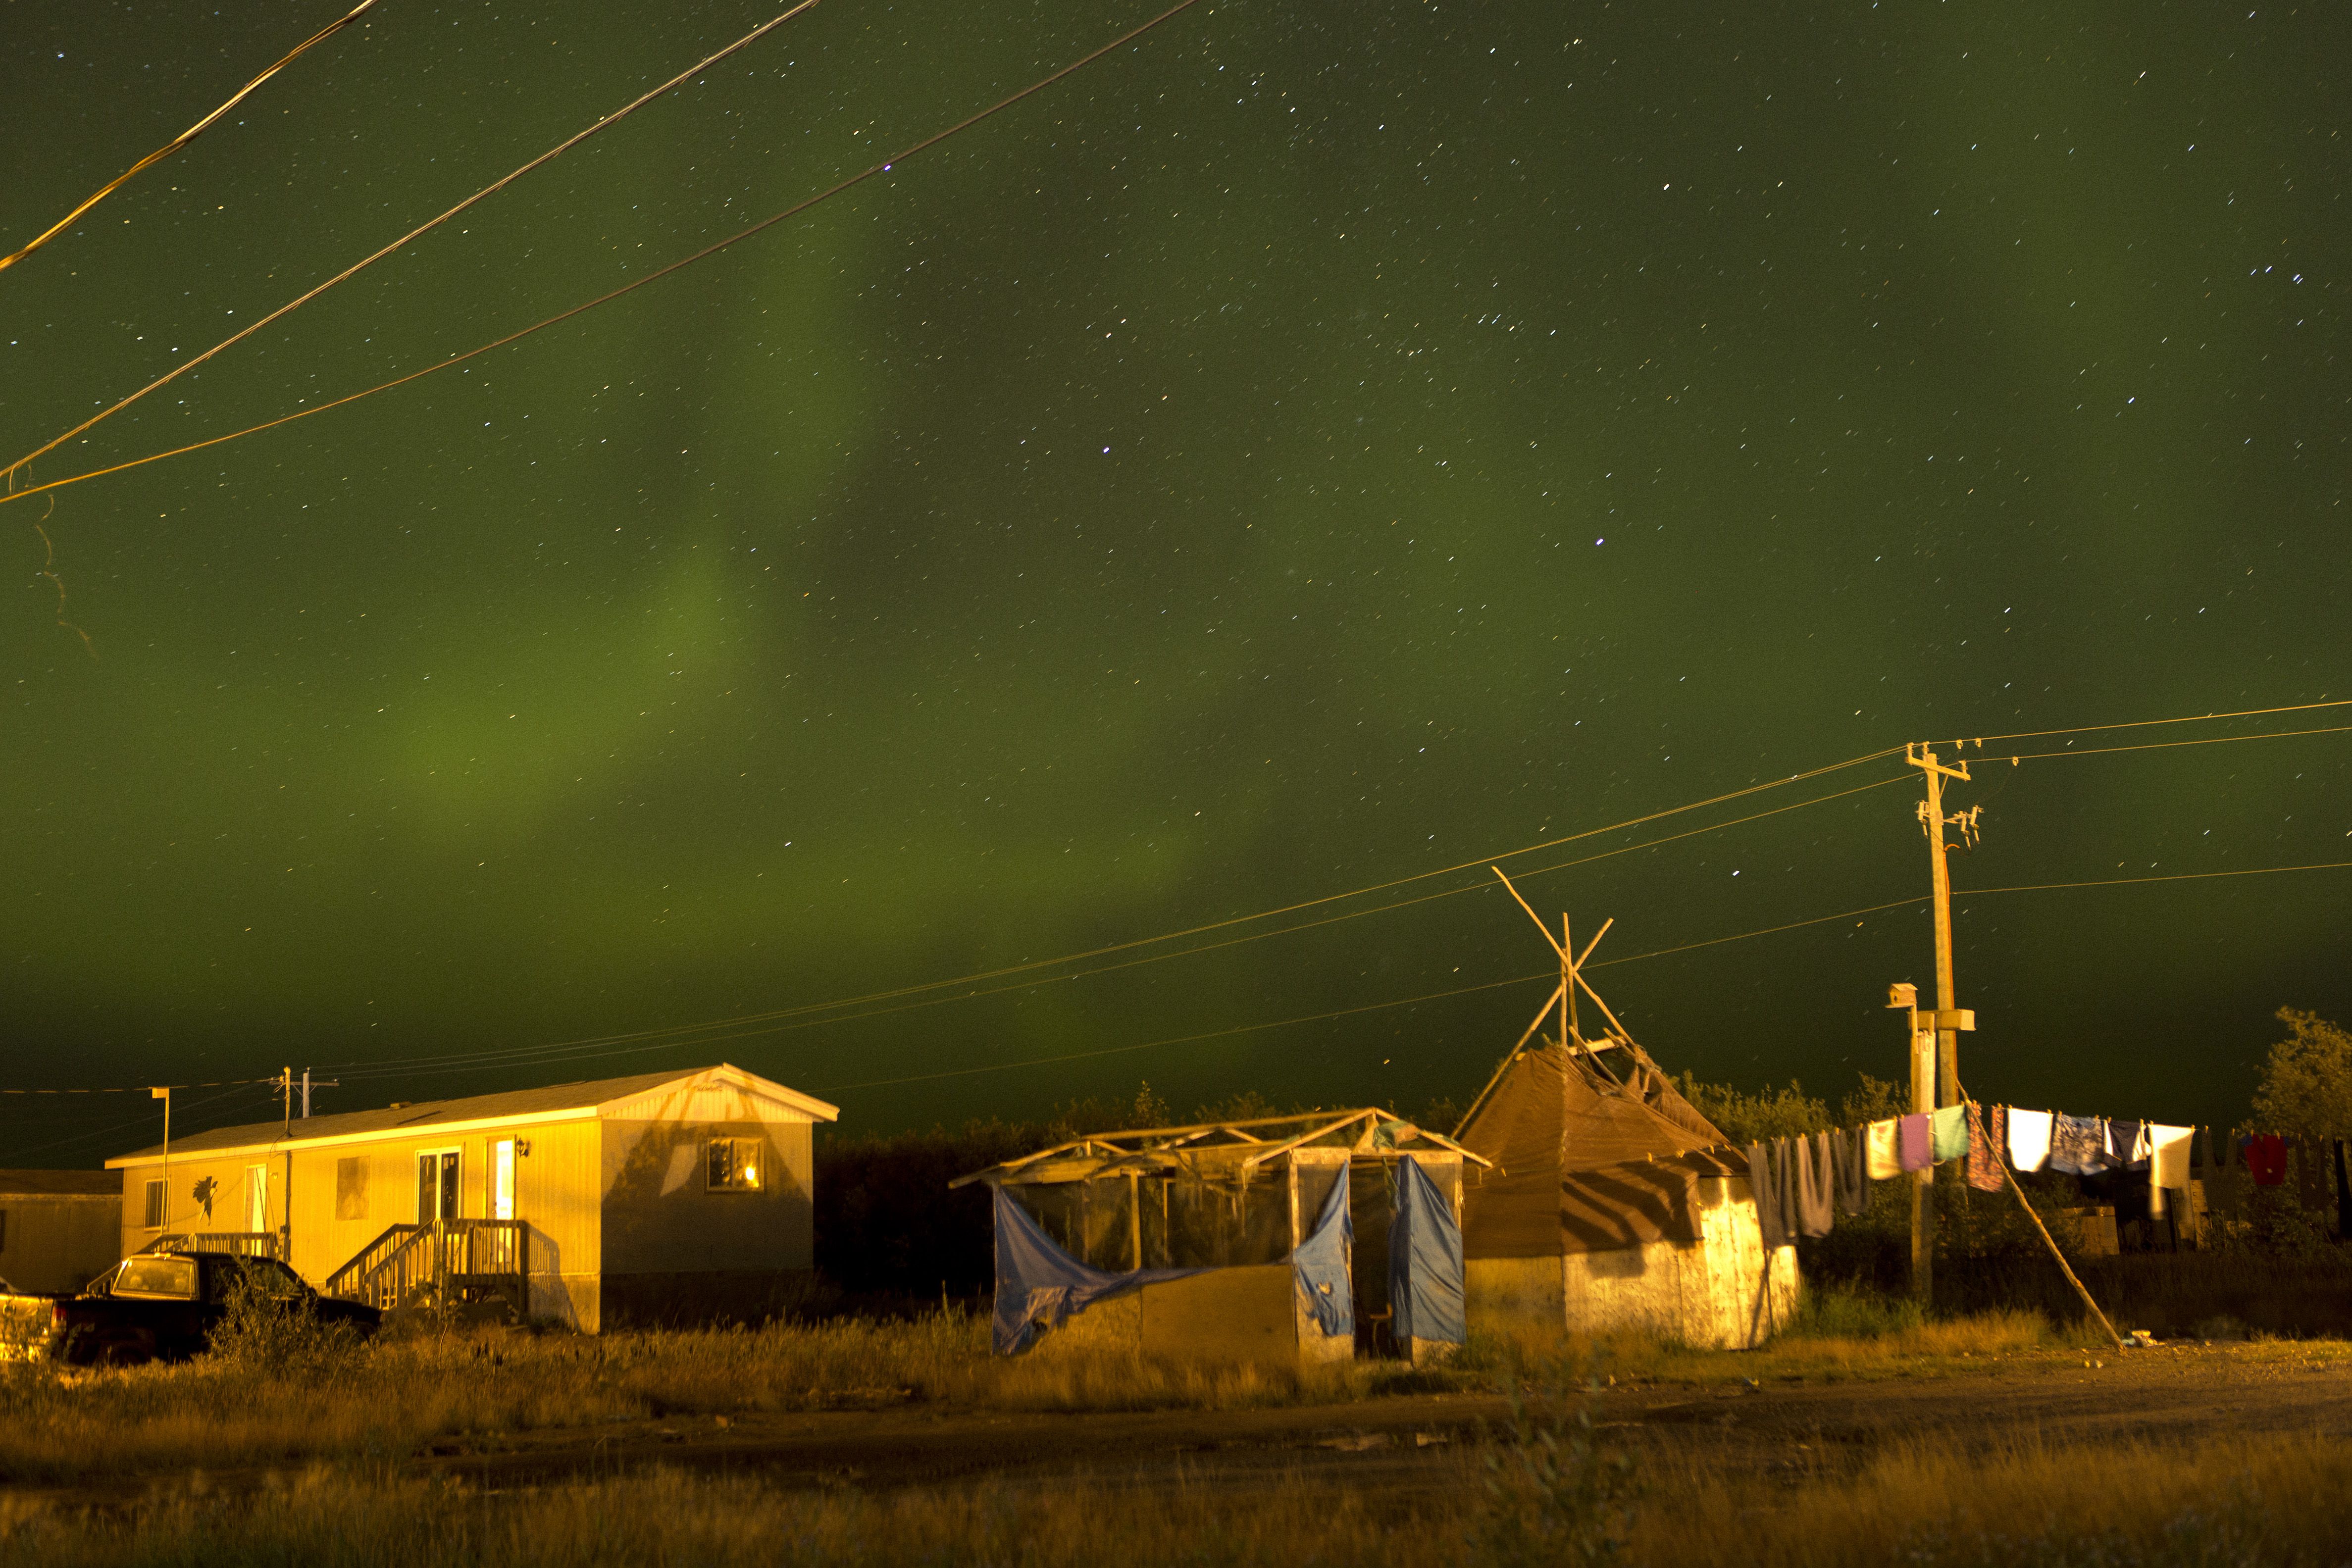 Attawapiskat, Ontario, Canada. The Northern lights, almost overpowering in their physical beauty, fill the night sky over Attawapiskat. Cree legends state that the lights are spirits of the ancestors celebrating life and showing the living that they are all part of creation. Their dancing forms a laneway for the souls as they travel to the next realm. It is said that when Cree are living the right way and conducting ceremonies and dances, the spirits of Cree ancestors celebrate in the heavens. Image by David Maurice Smith. Canada, 2016.